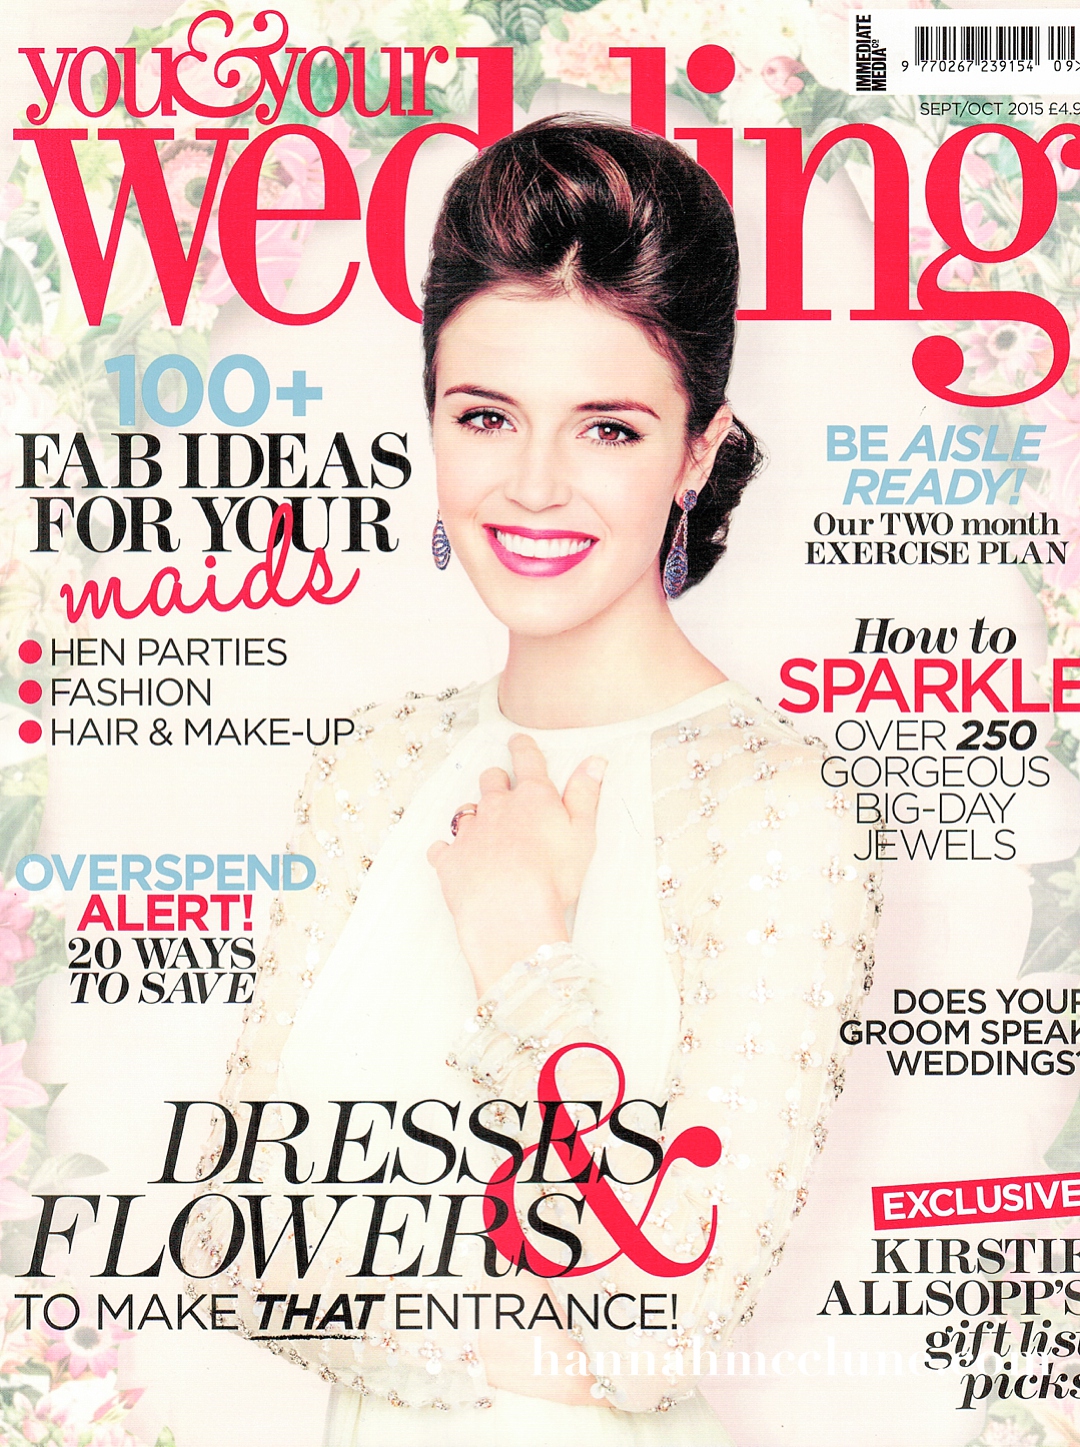 Stoke Place in You & Your Wedding magazine photographer